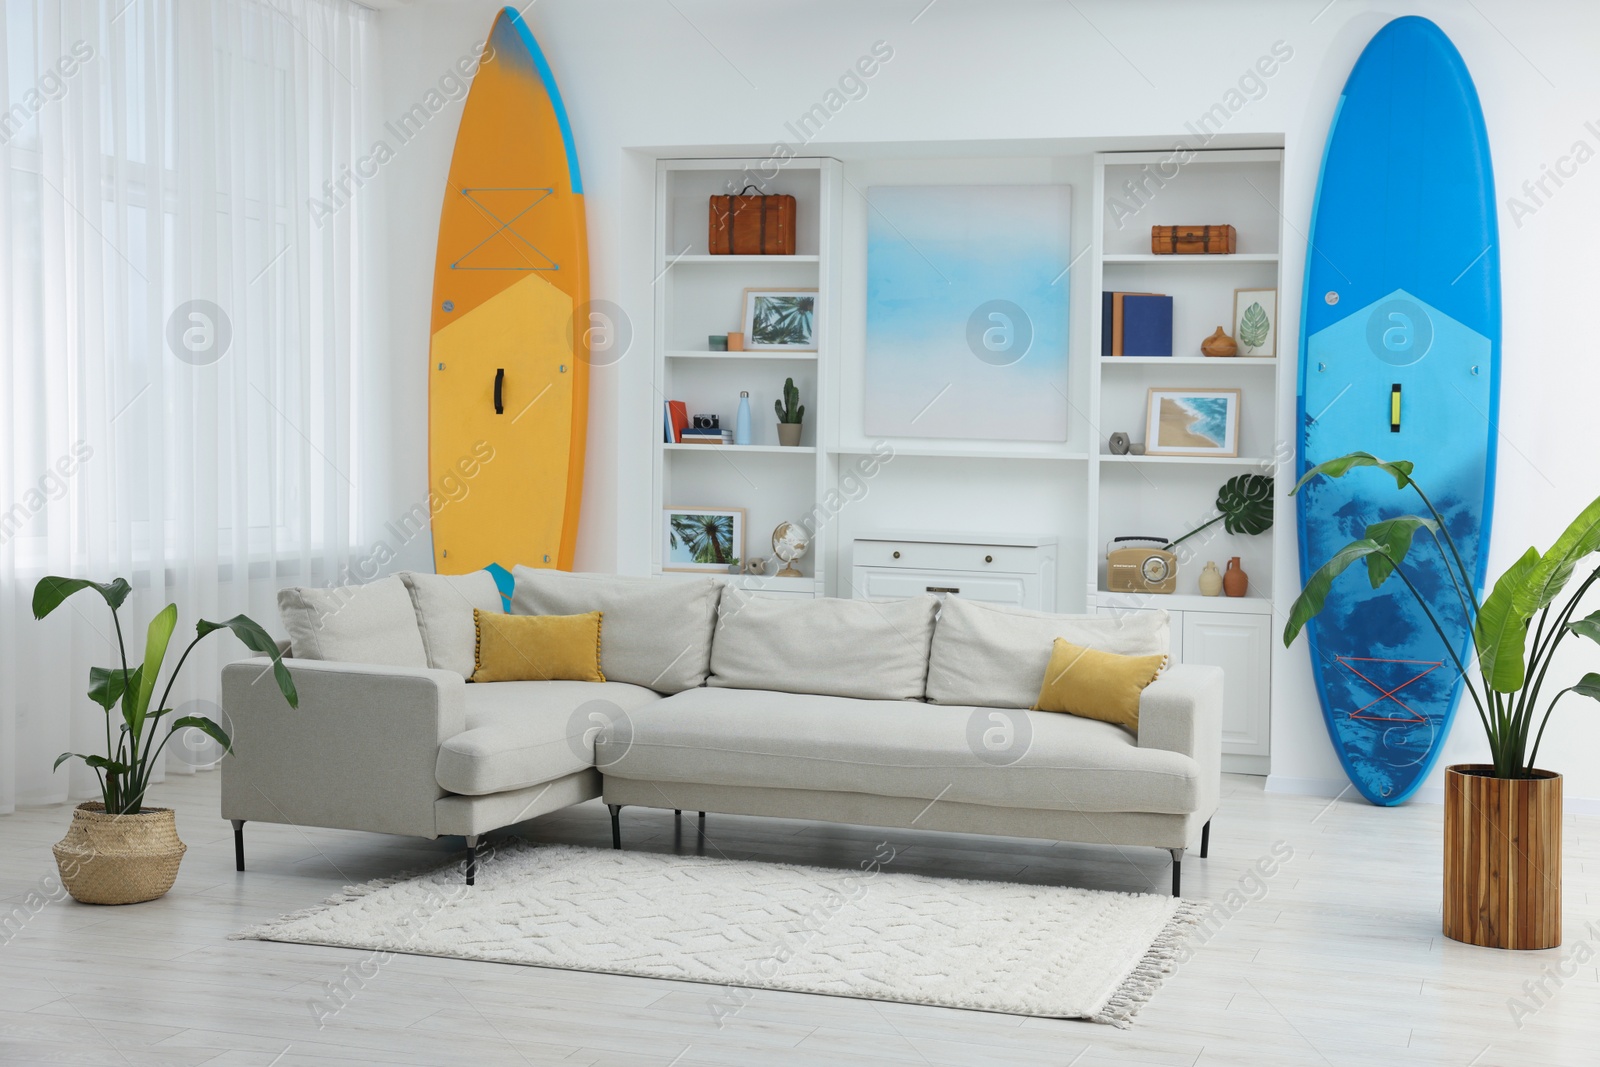 Photo of SUP boards, shelving unit with different decor elements and stylish sofa in room. Interior design